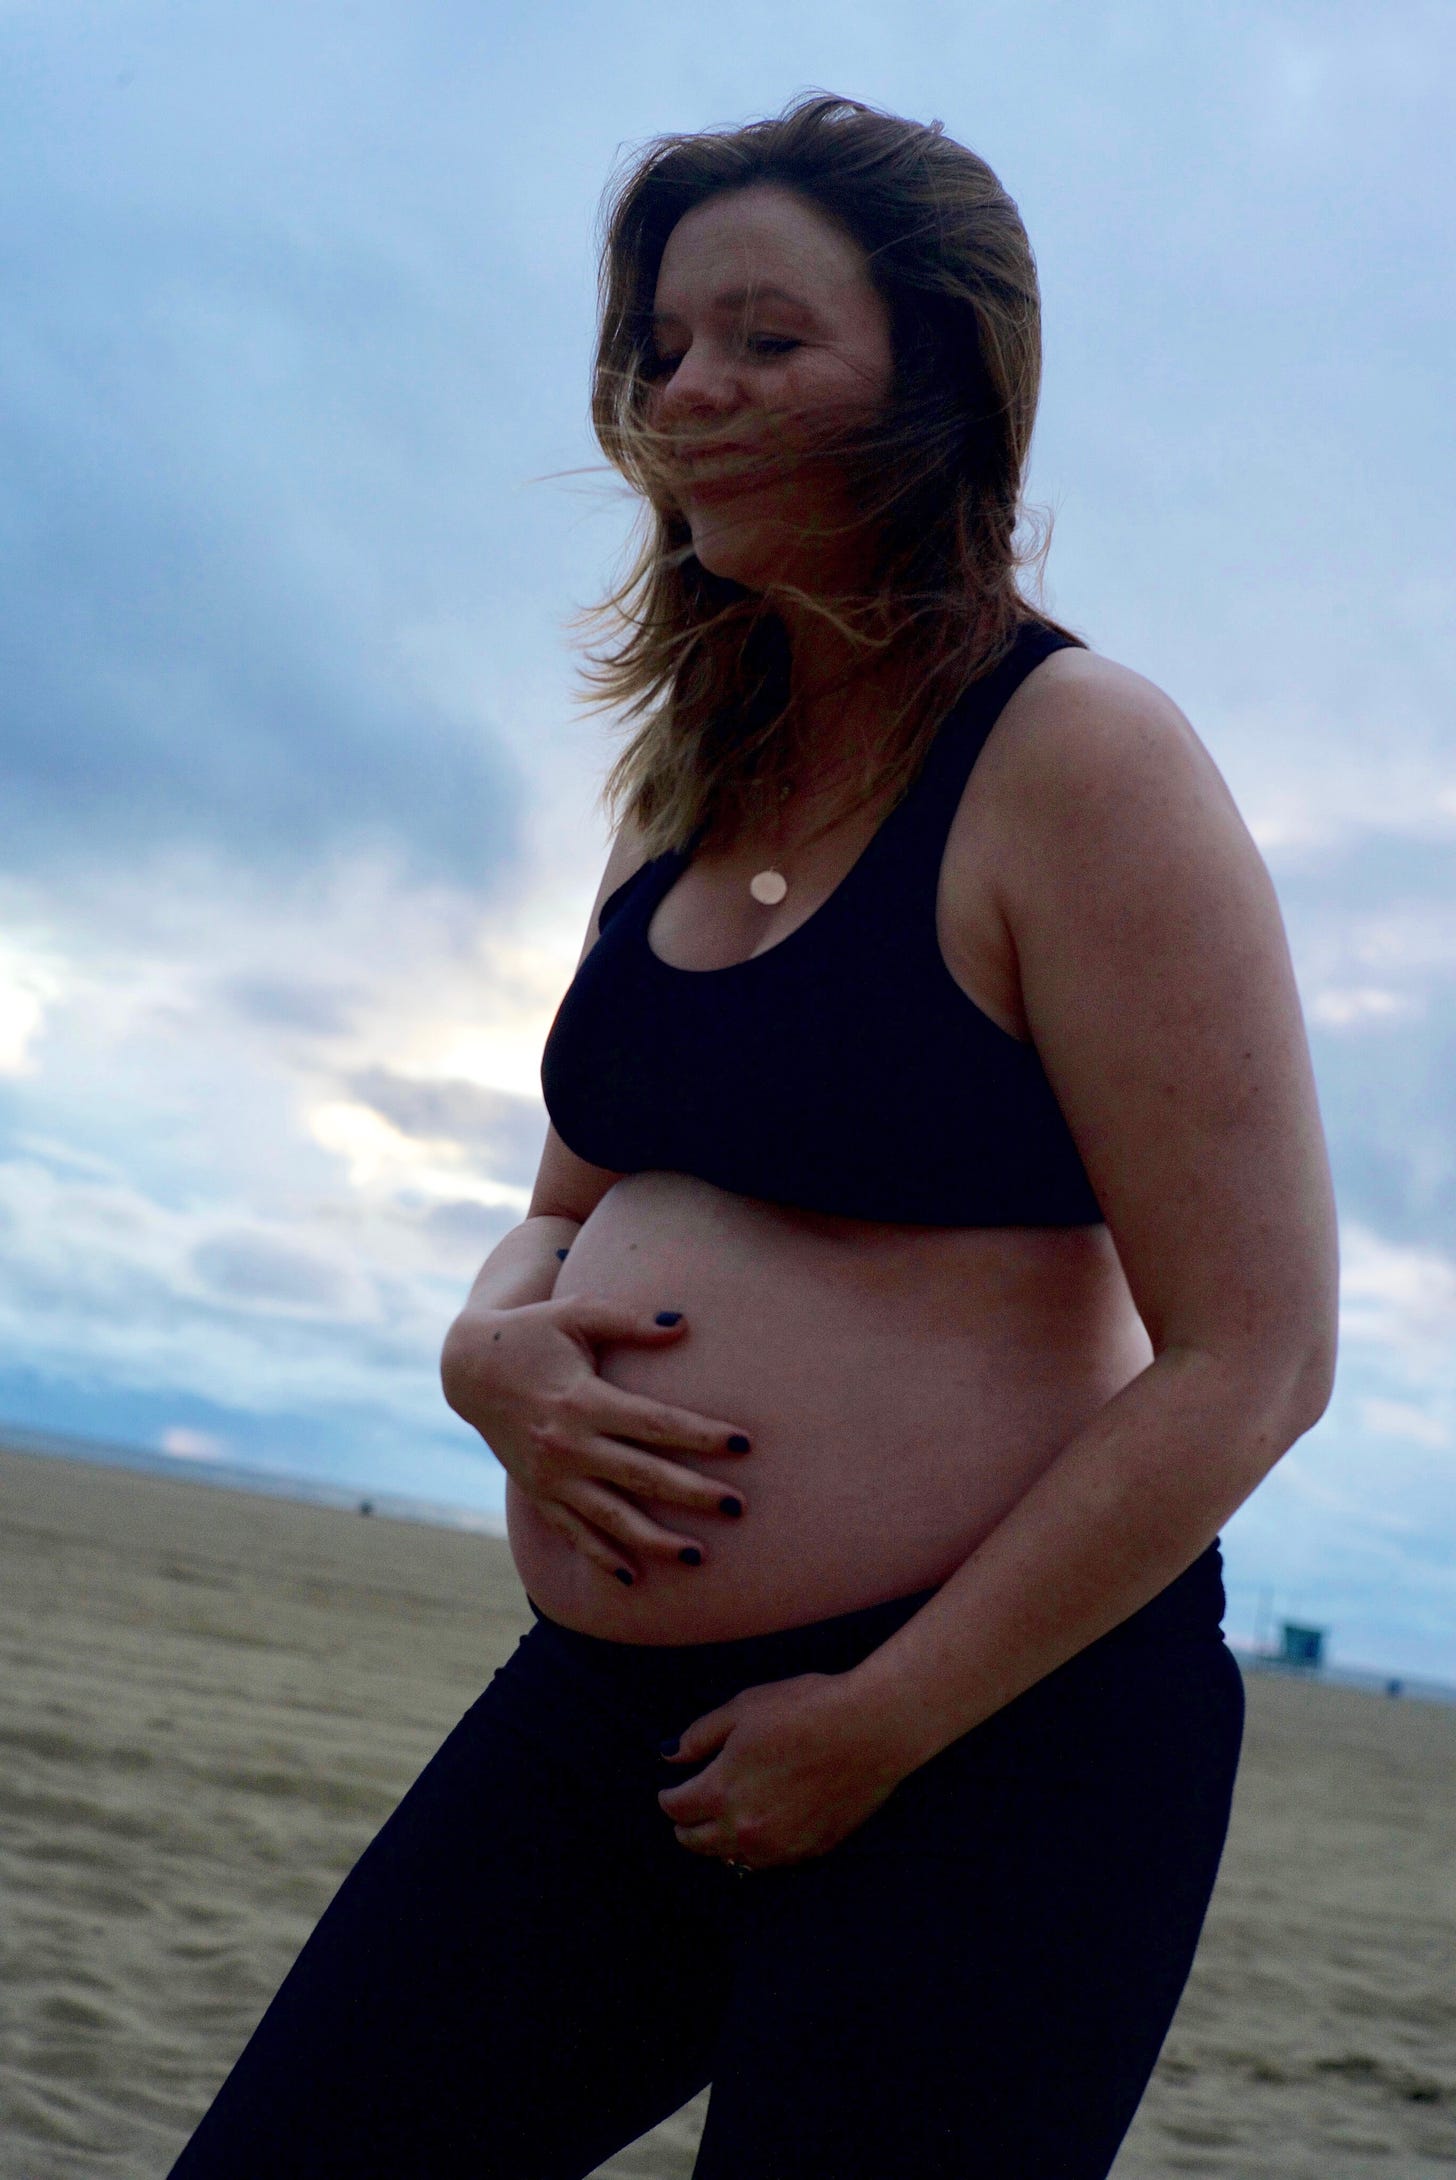 Amber Tamblyn on a beach. The sky is overcast. The wind has blown her hair into her face but you can make out see is laughing. She wears a sports bra and leggings, showing her pregnant stomach which she rests a hand on.